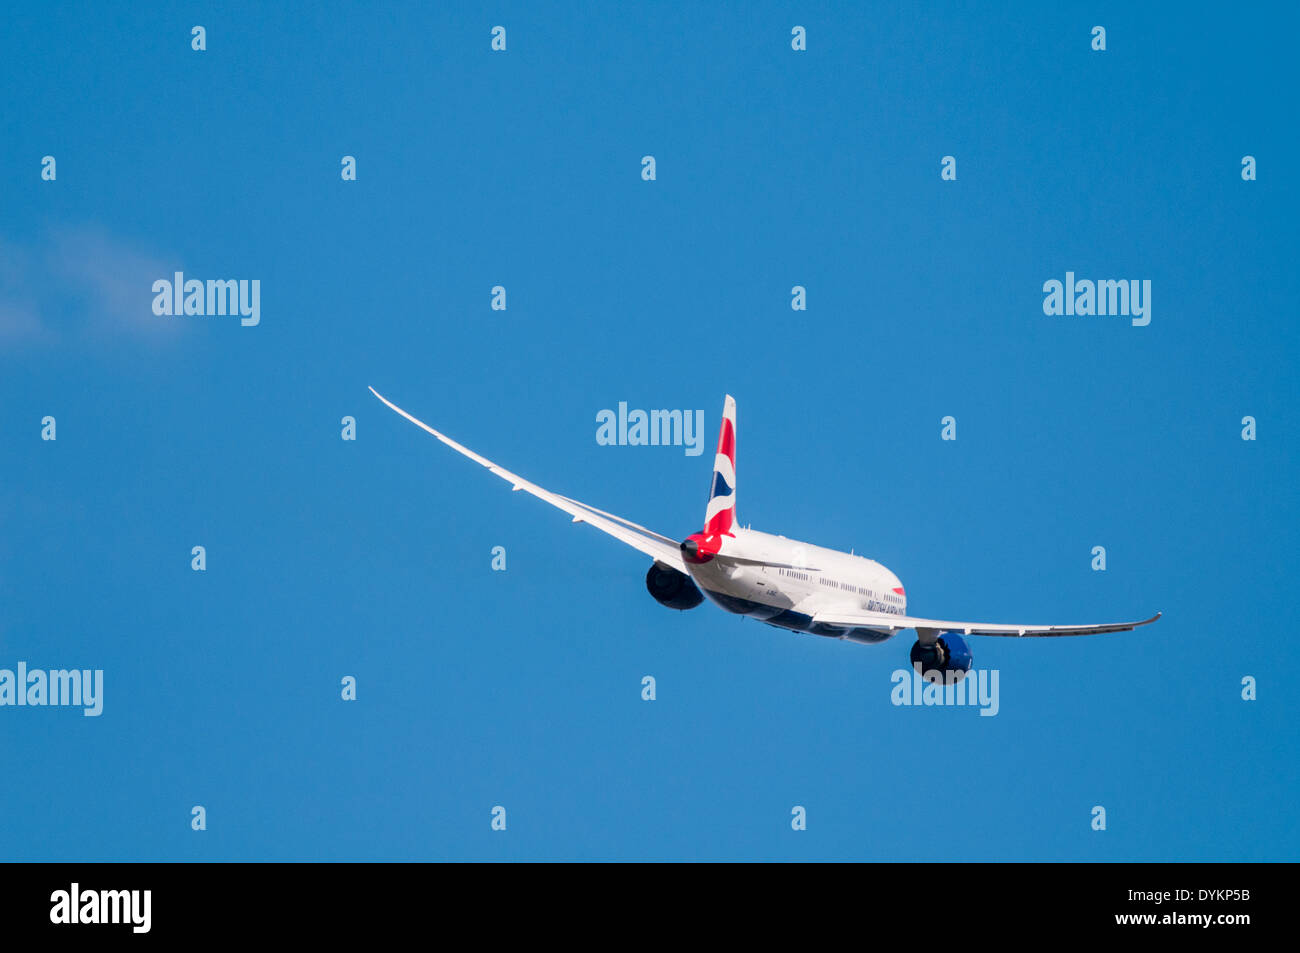 Rear view of a British Airways Boeing 787 Dreamliner plane banking away after taking off Stock Photo